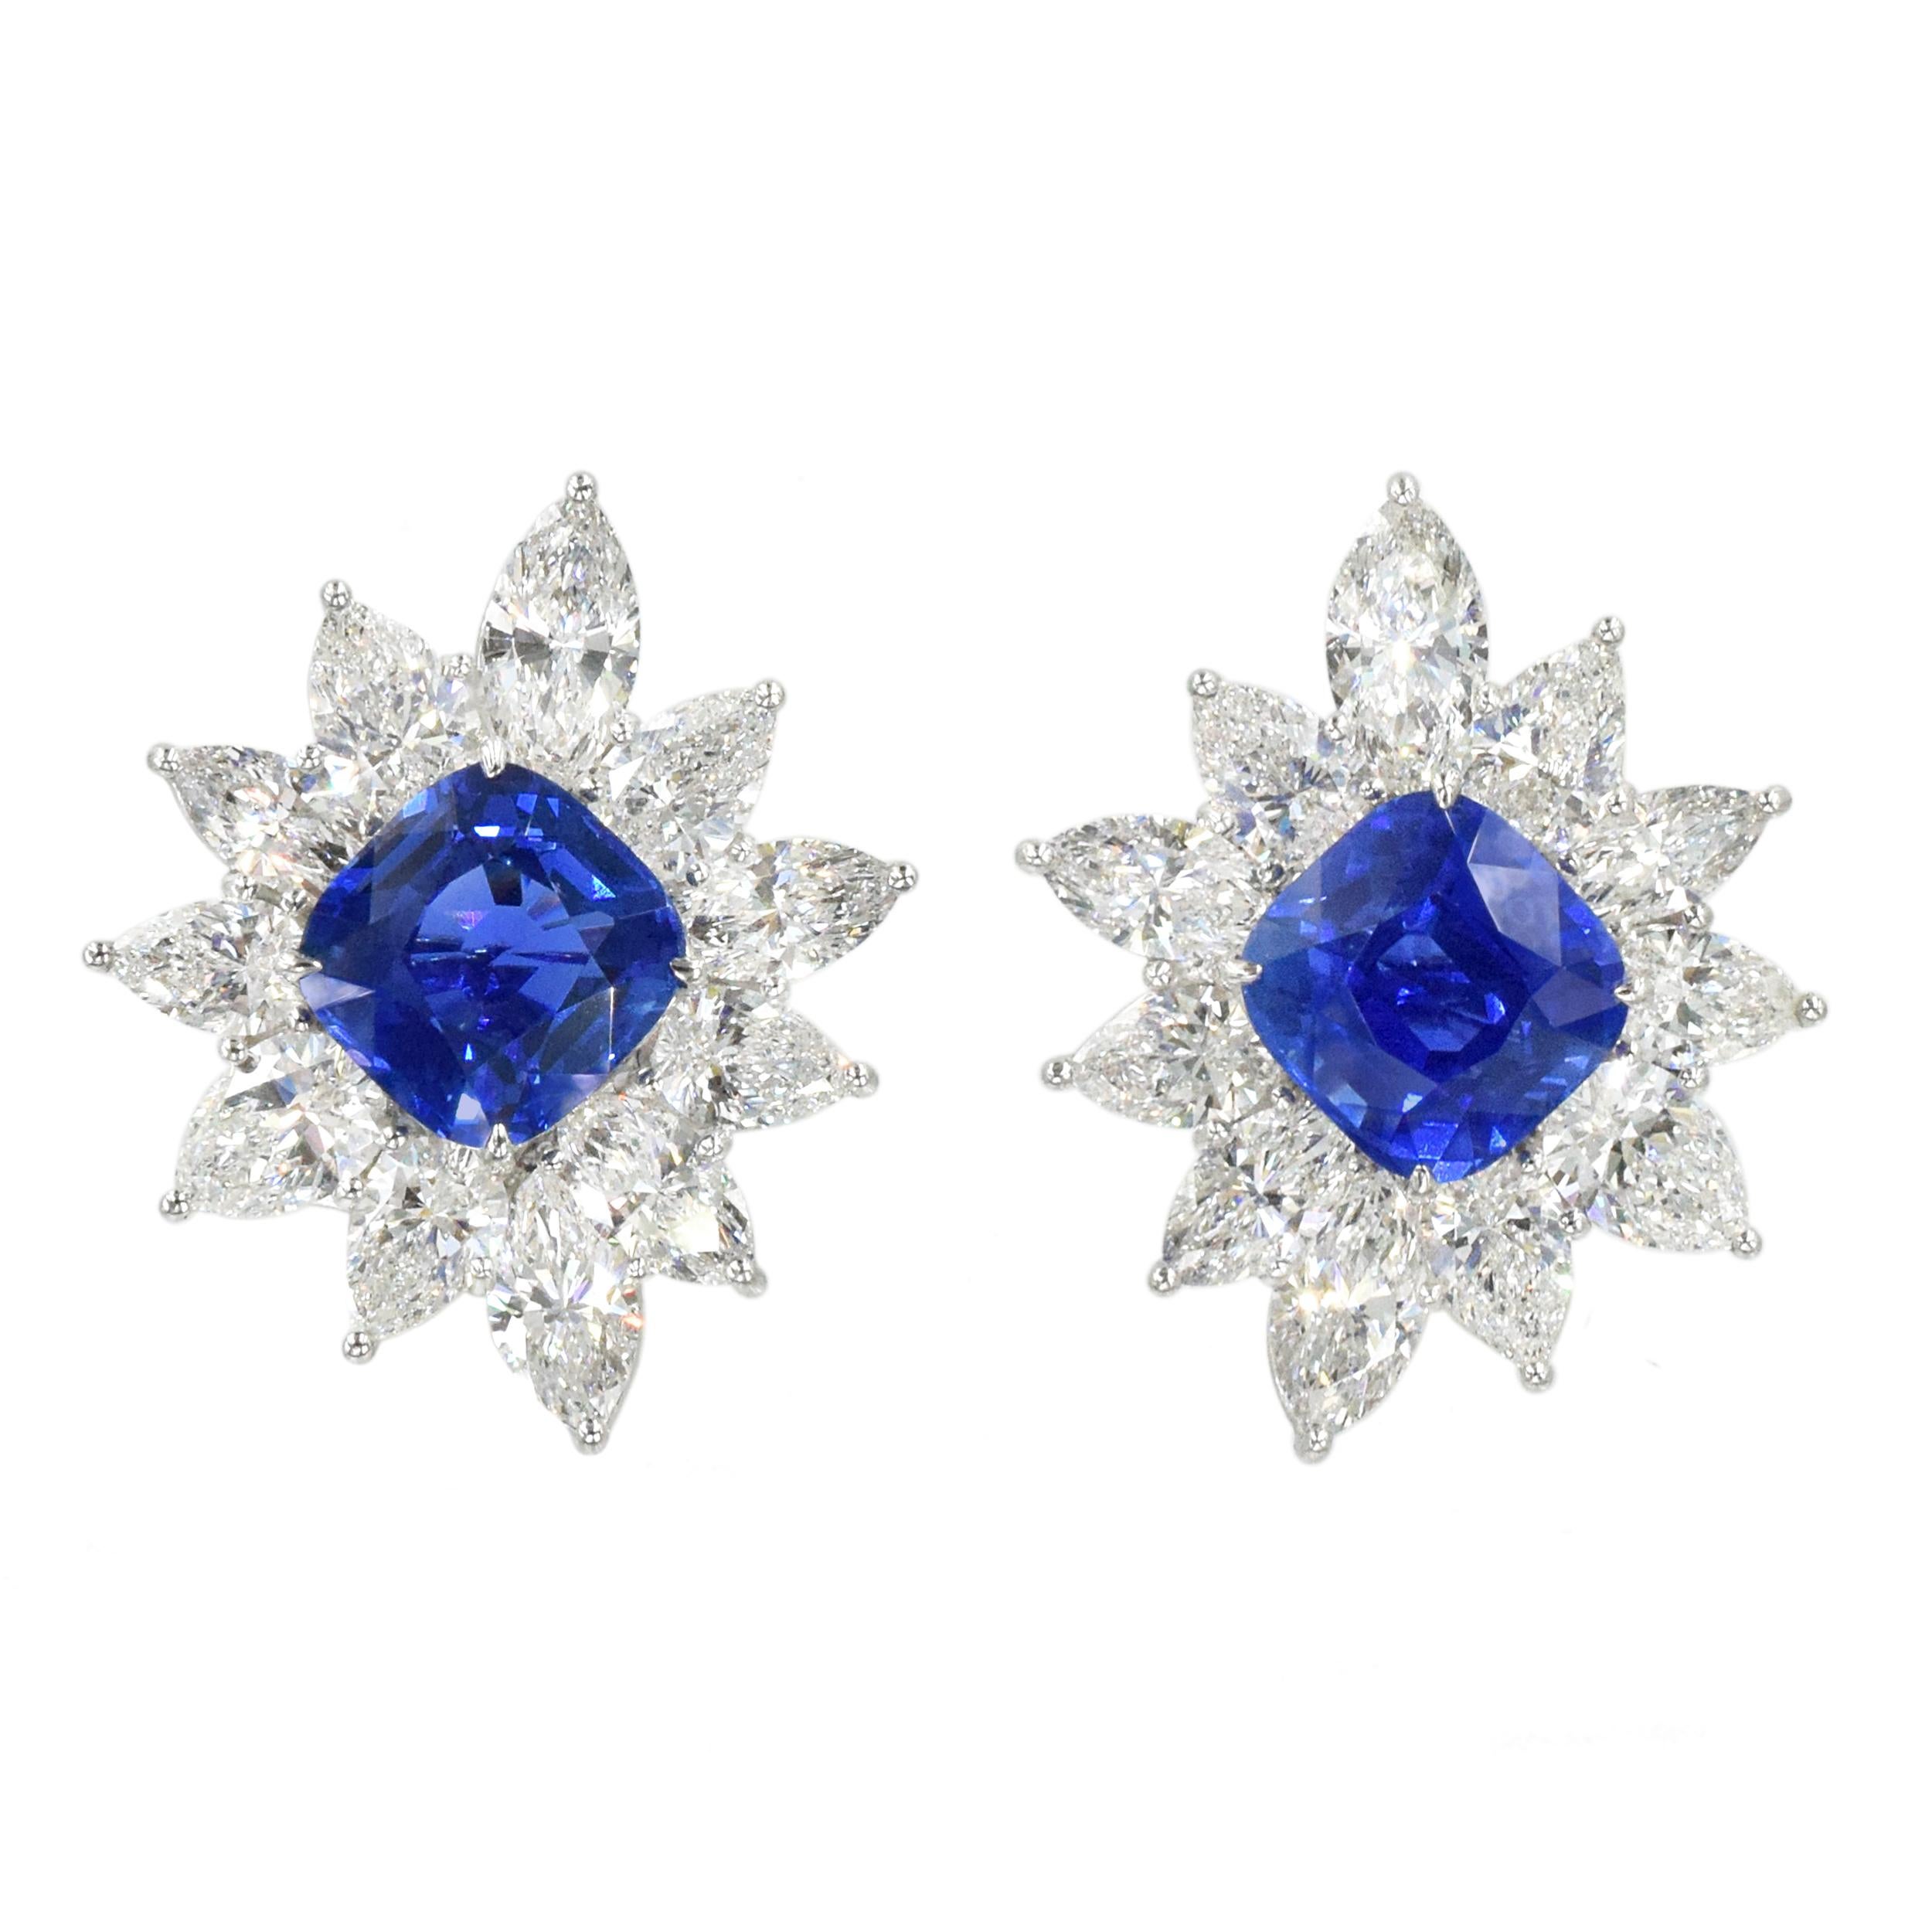 Harry Winston Sapphire and Diamond Ear clips in platinum and 18k
white gold. Each earring set in the center with a cushion cut sapphire. Framed by pear and marquise shaped diamonds with total weight of approximately 14.35 carats
Sapphires weighing